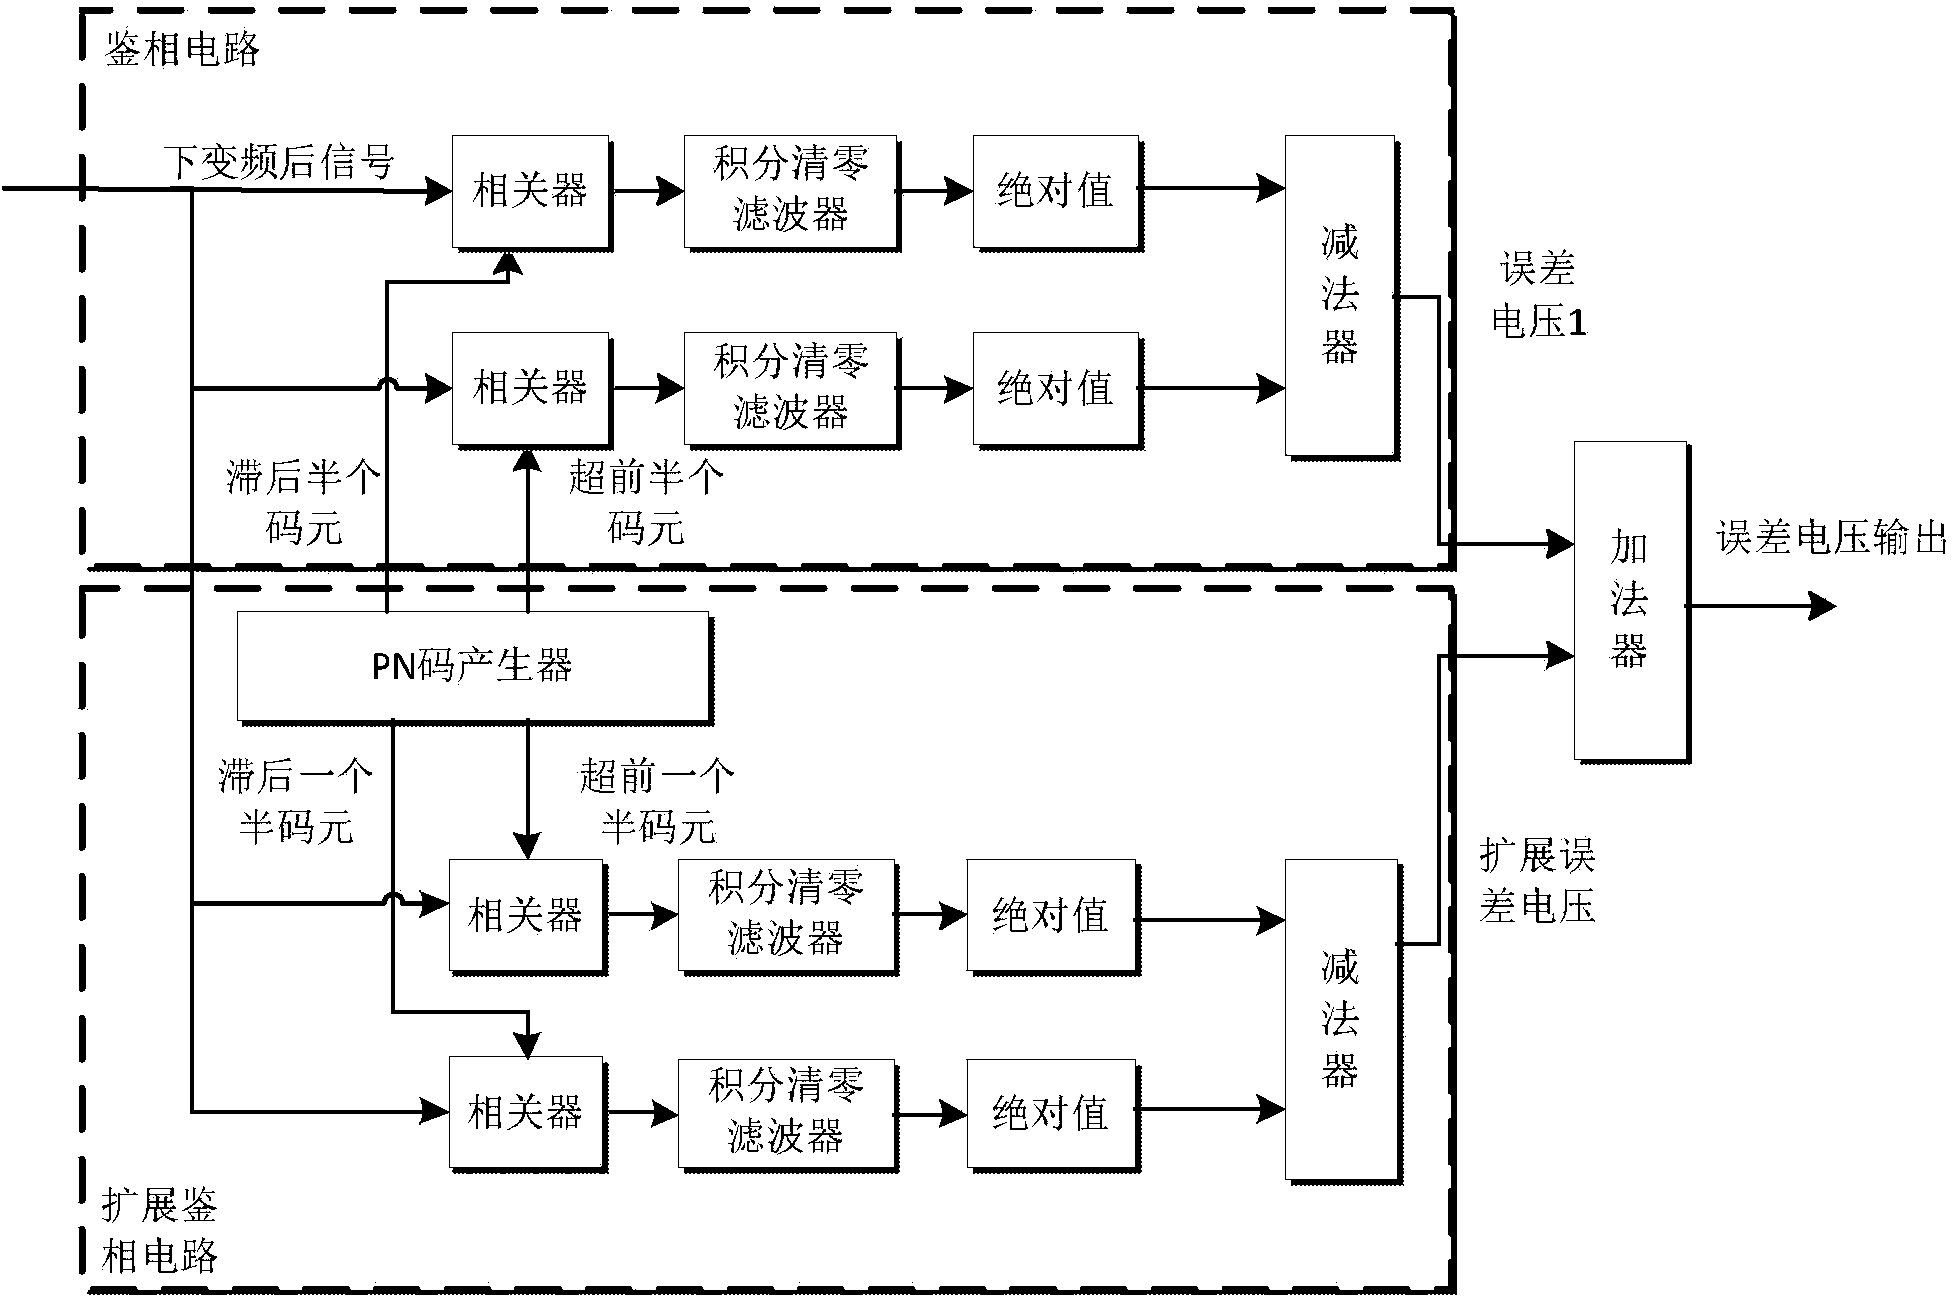 Auxiliary phase discrimination circuit of PN code loop